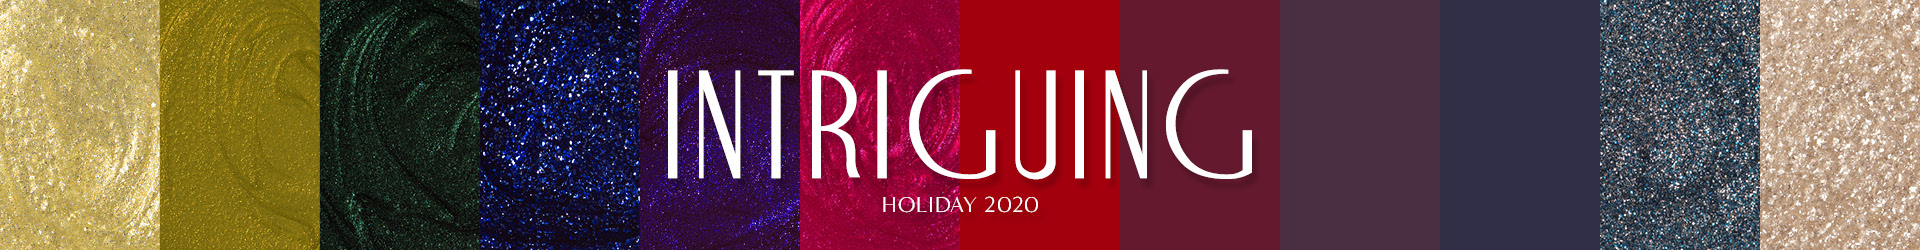 Zoya Holiday 2020 - Intriguing Collection